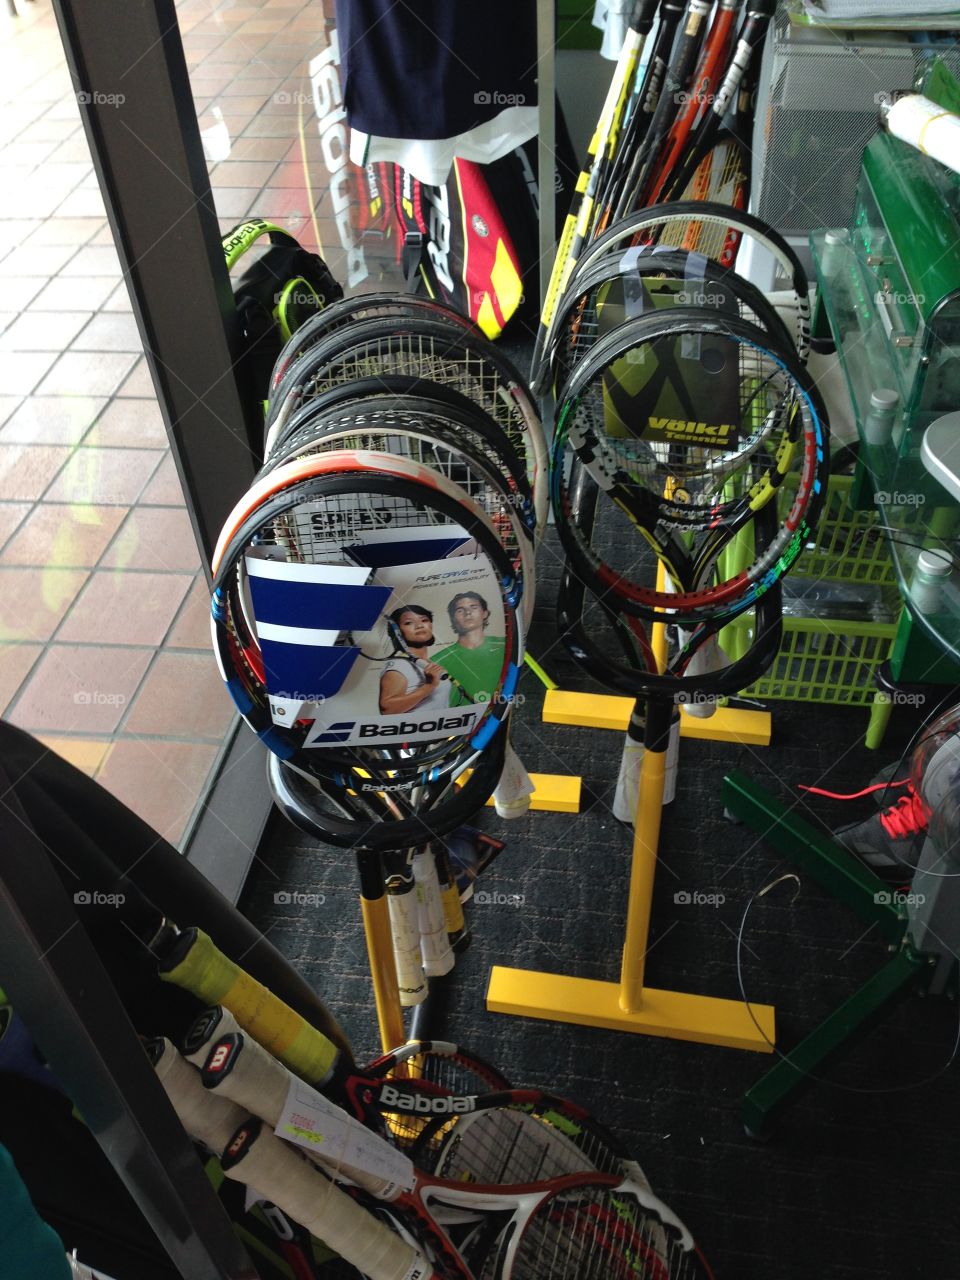 A whole lot of tennis racquets!